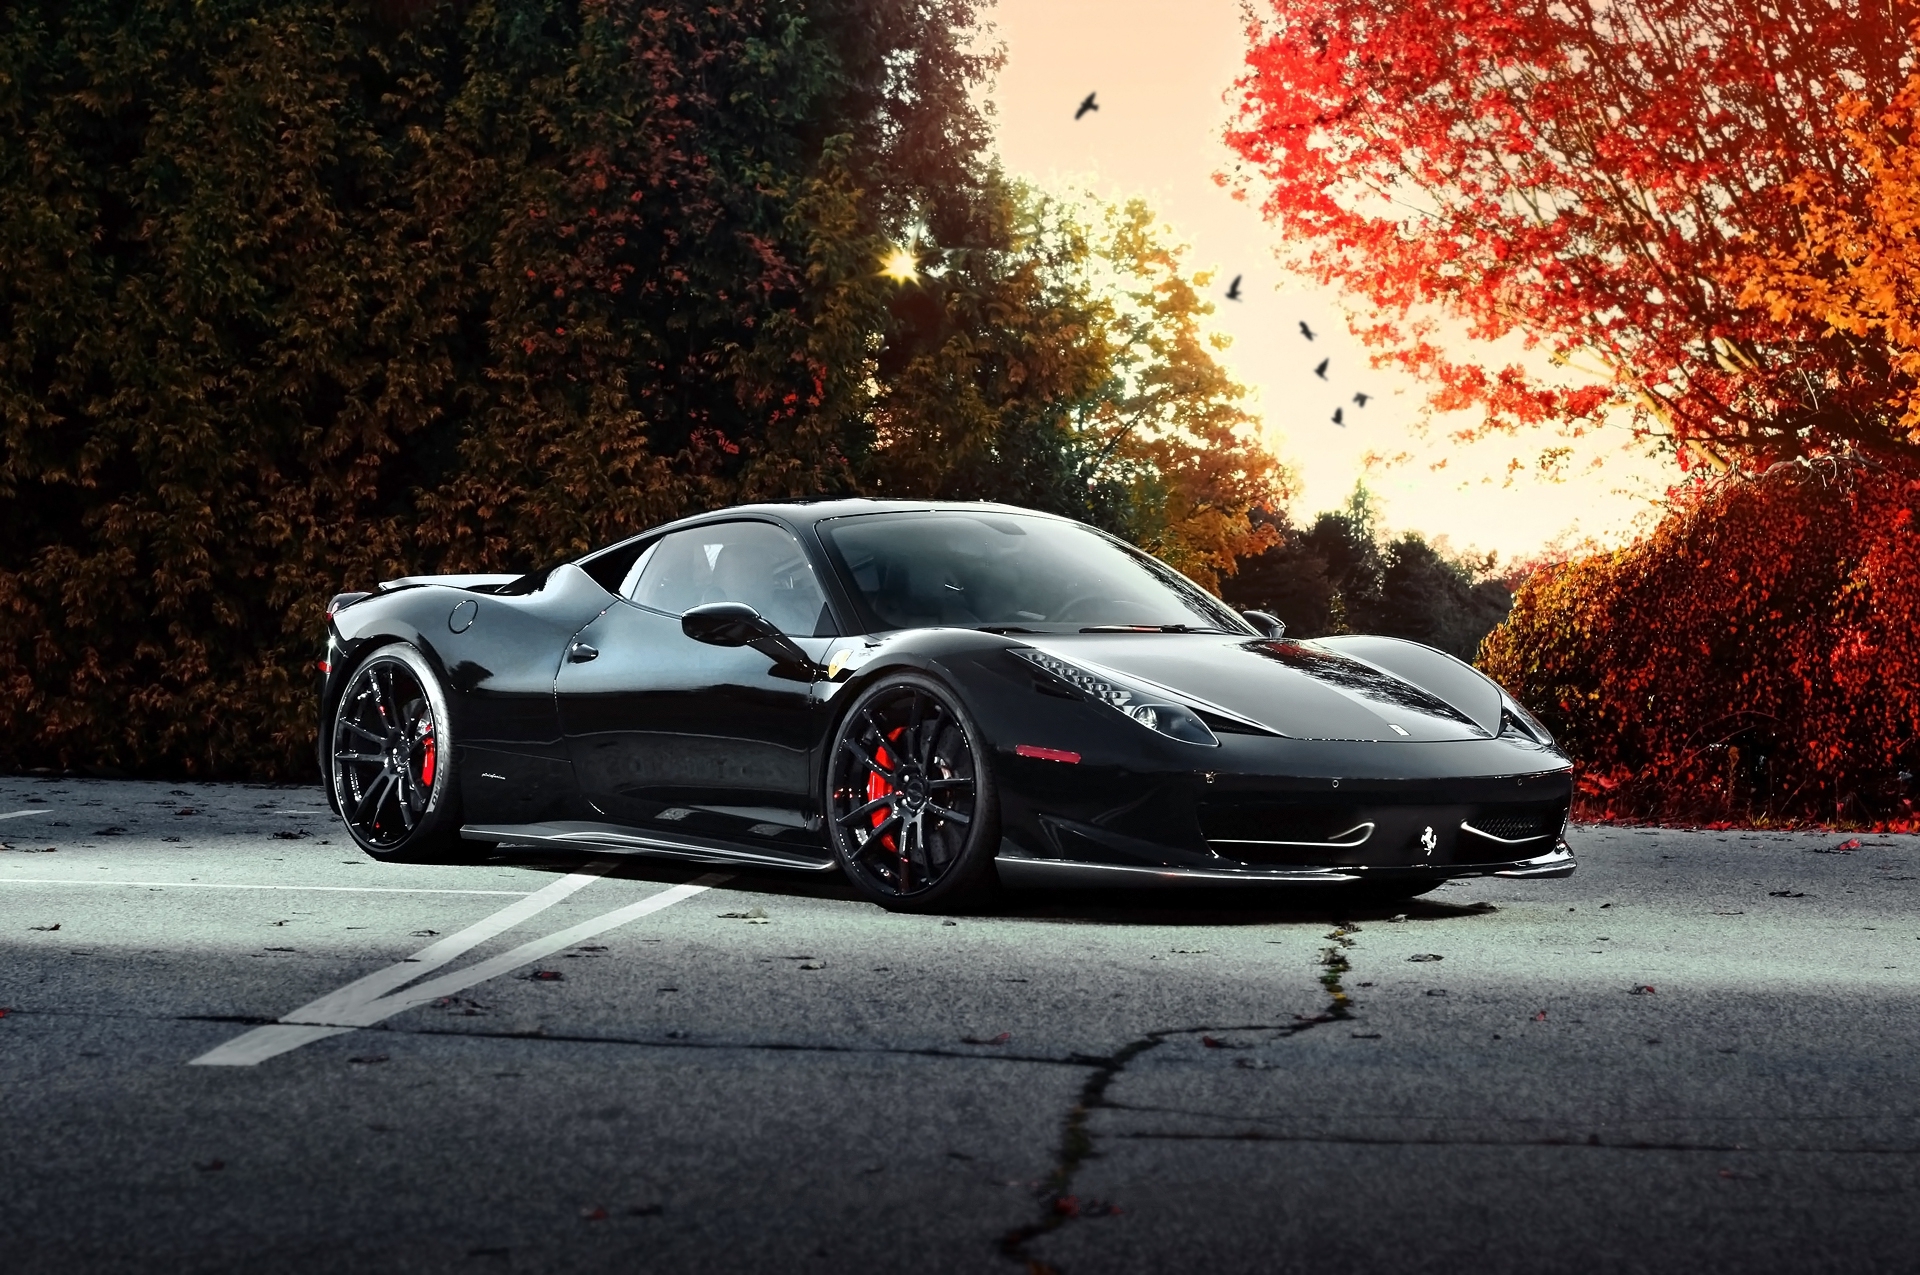 Free photo A black ferrari against the backdrop of an autumn forest